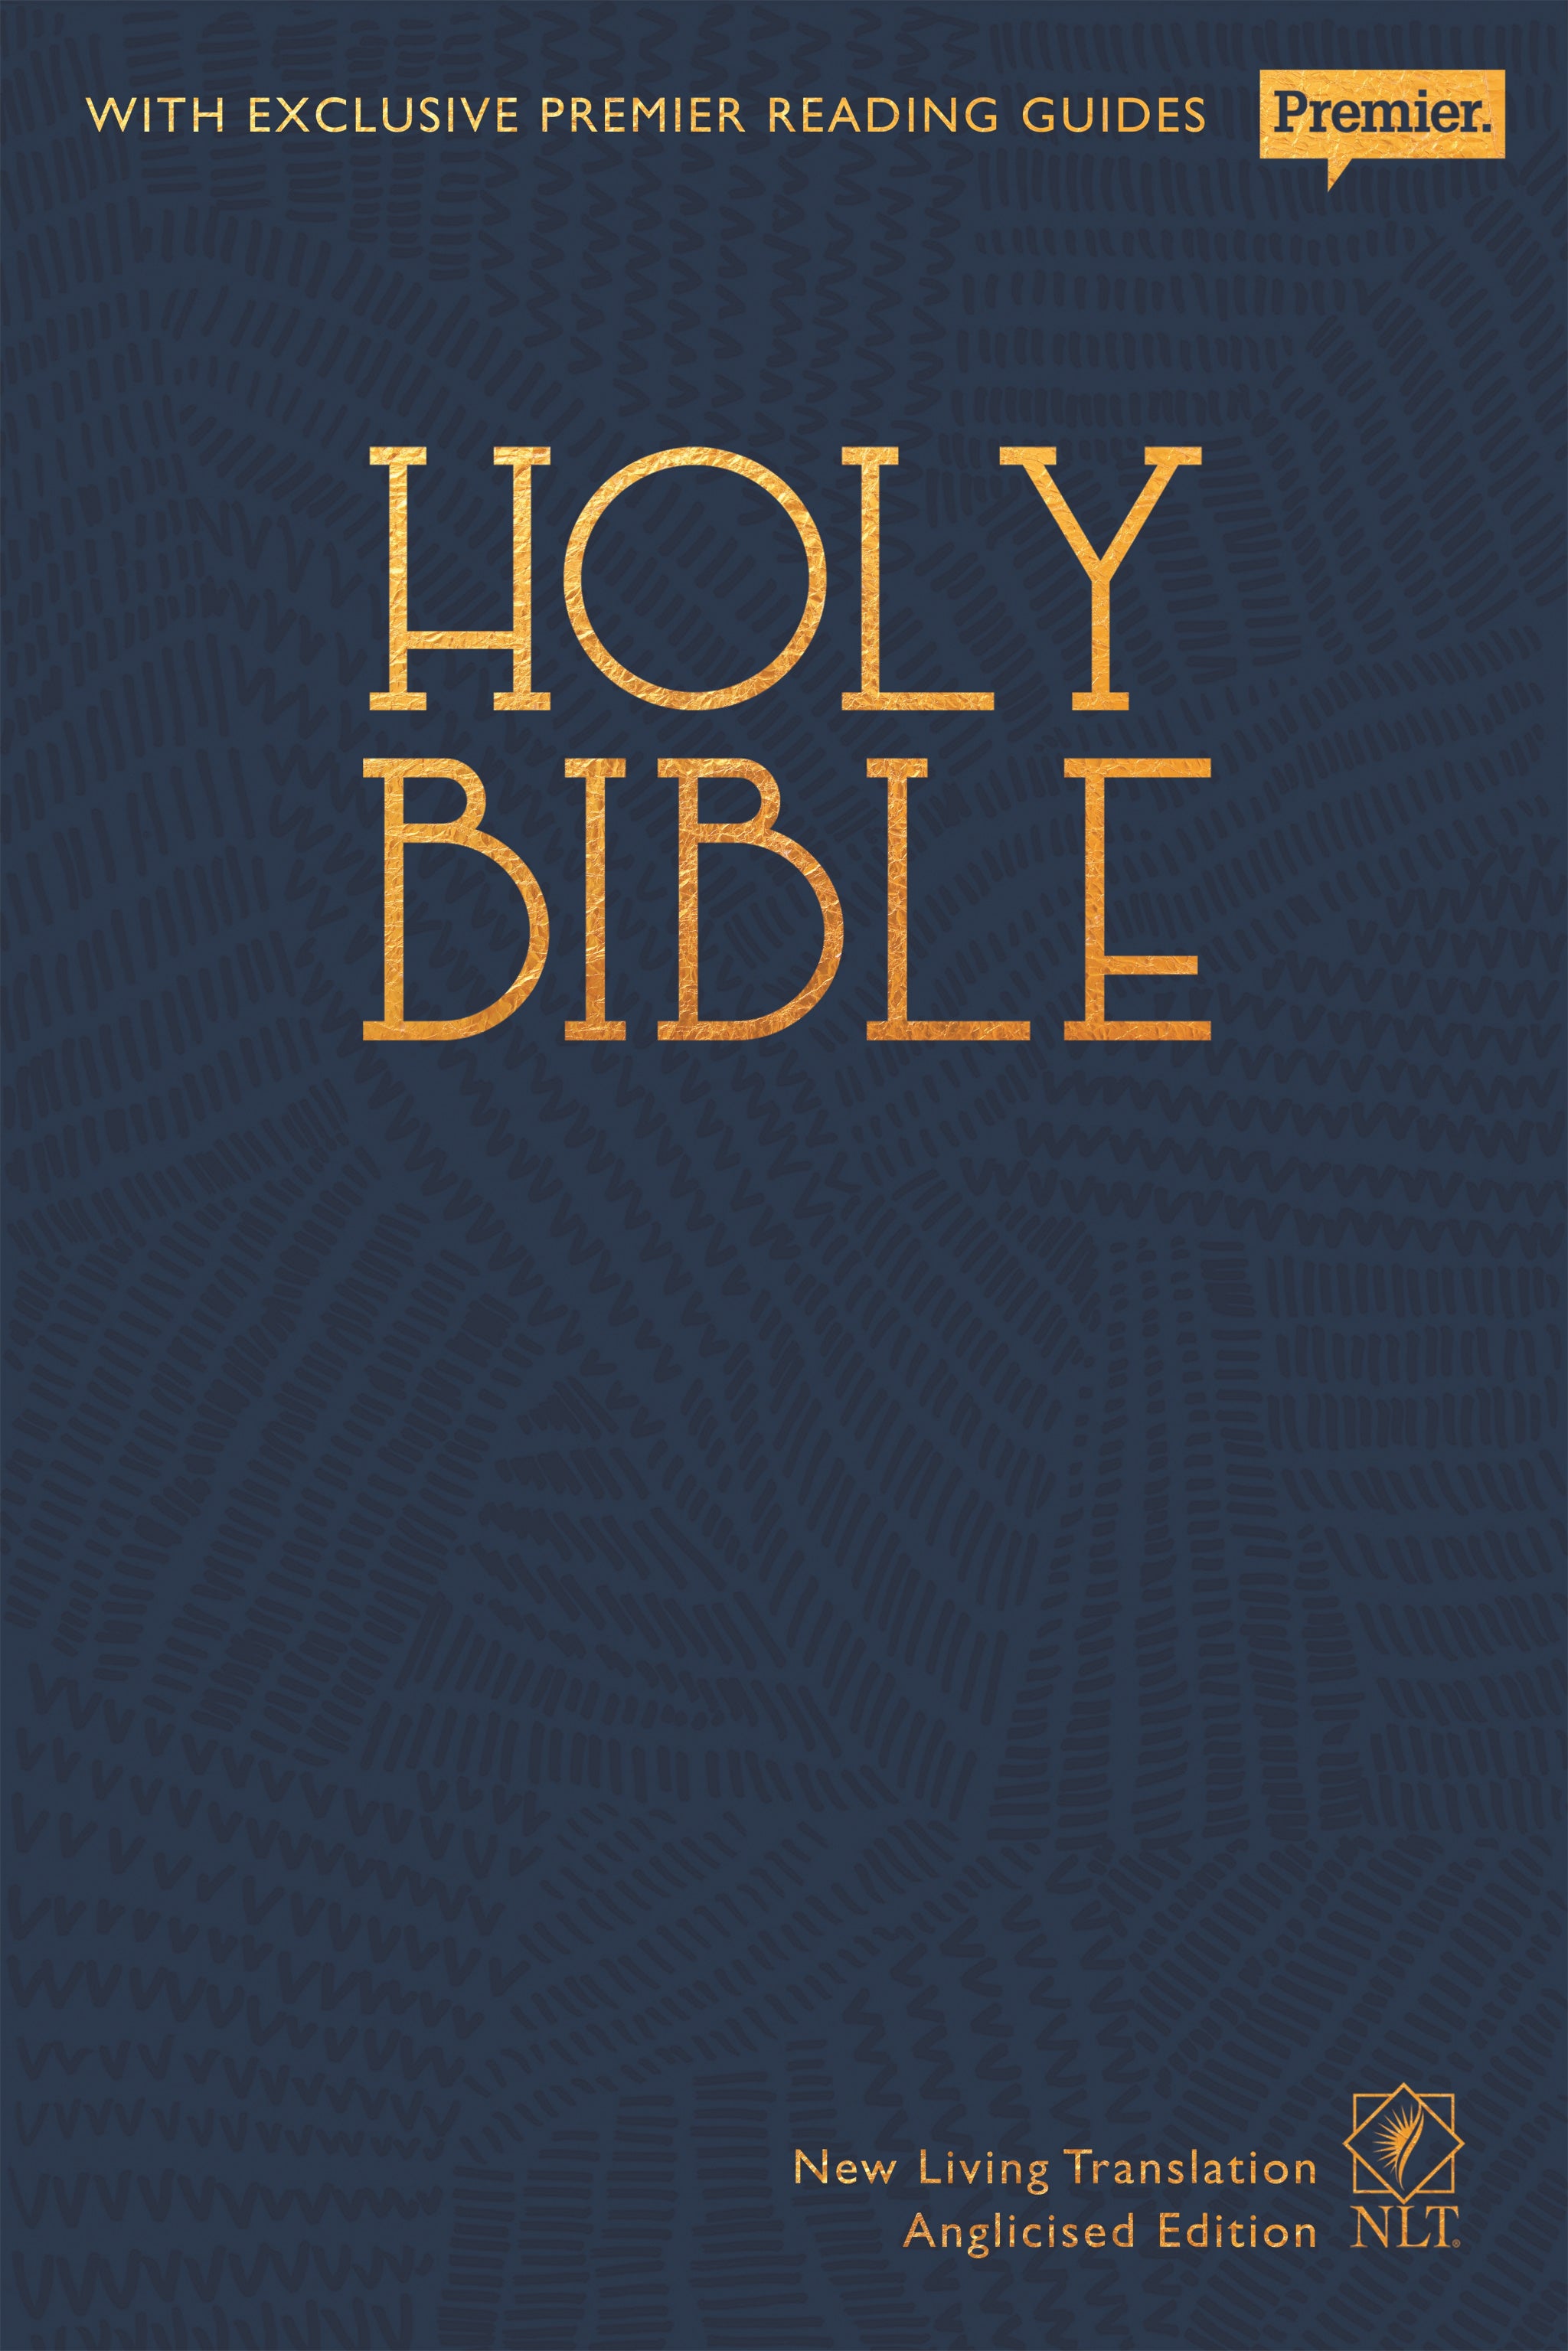 Image of NLT Premier, Holy Bible, Blue, Hardback, Anglicised Text, Reading Guide, 'God's Big Picture' Additional Content, Apologetics Content from Justin Brierley other